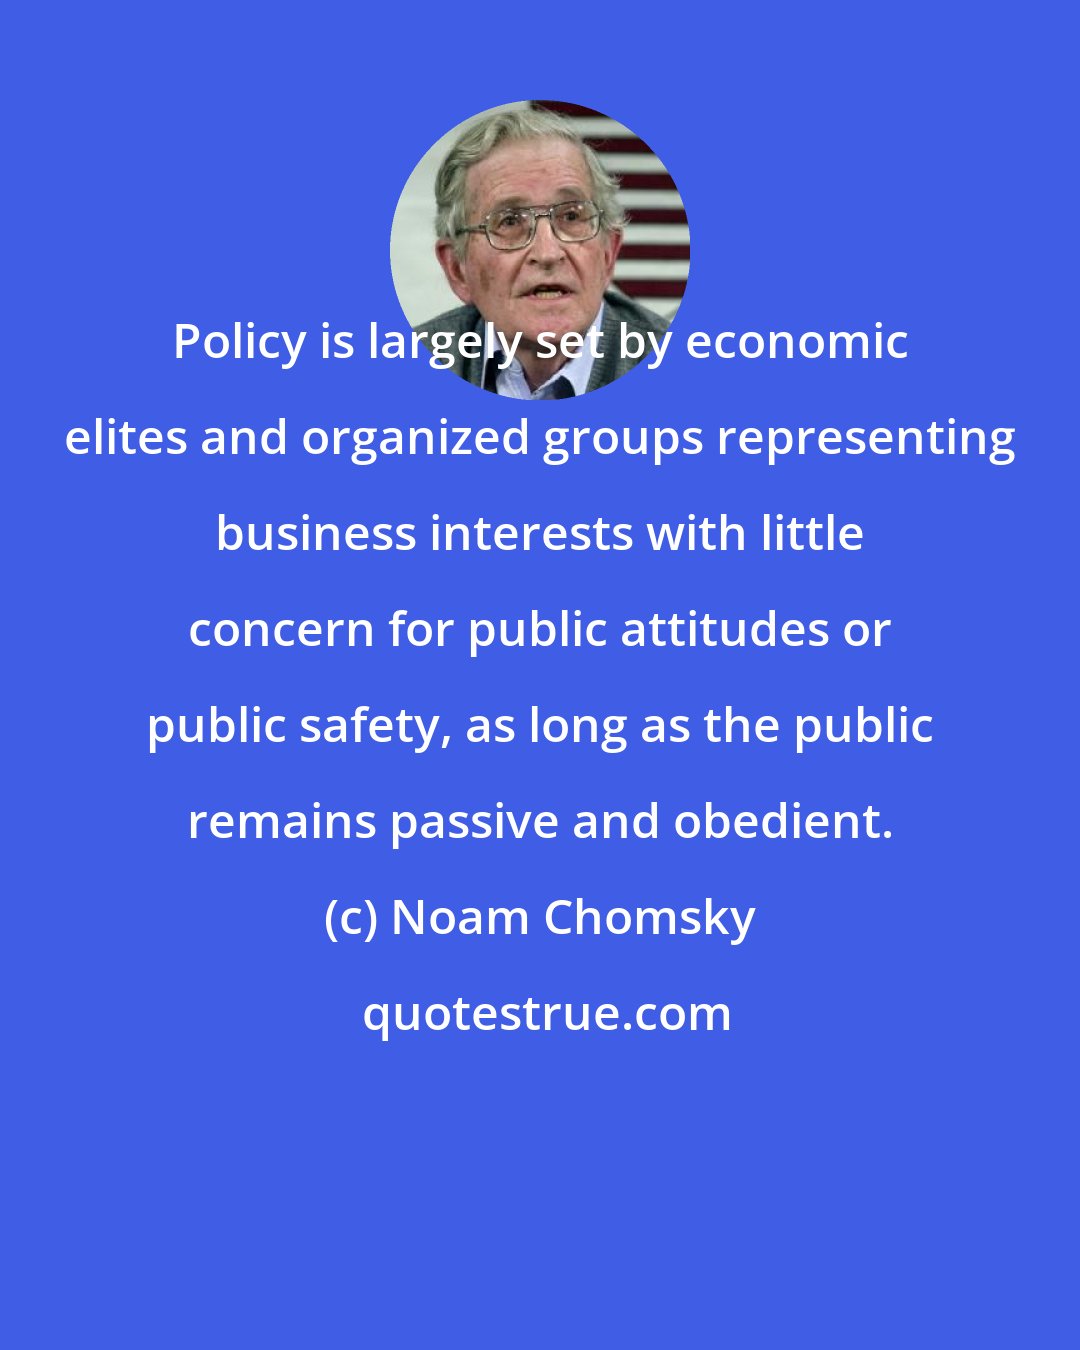 Noam Chomsky: Policy is largely set by economic elites and organized groups representing business interests with little concern for public attitudes or public safety, as long as the public remains passive and obedient.